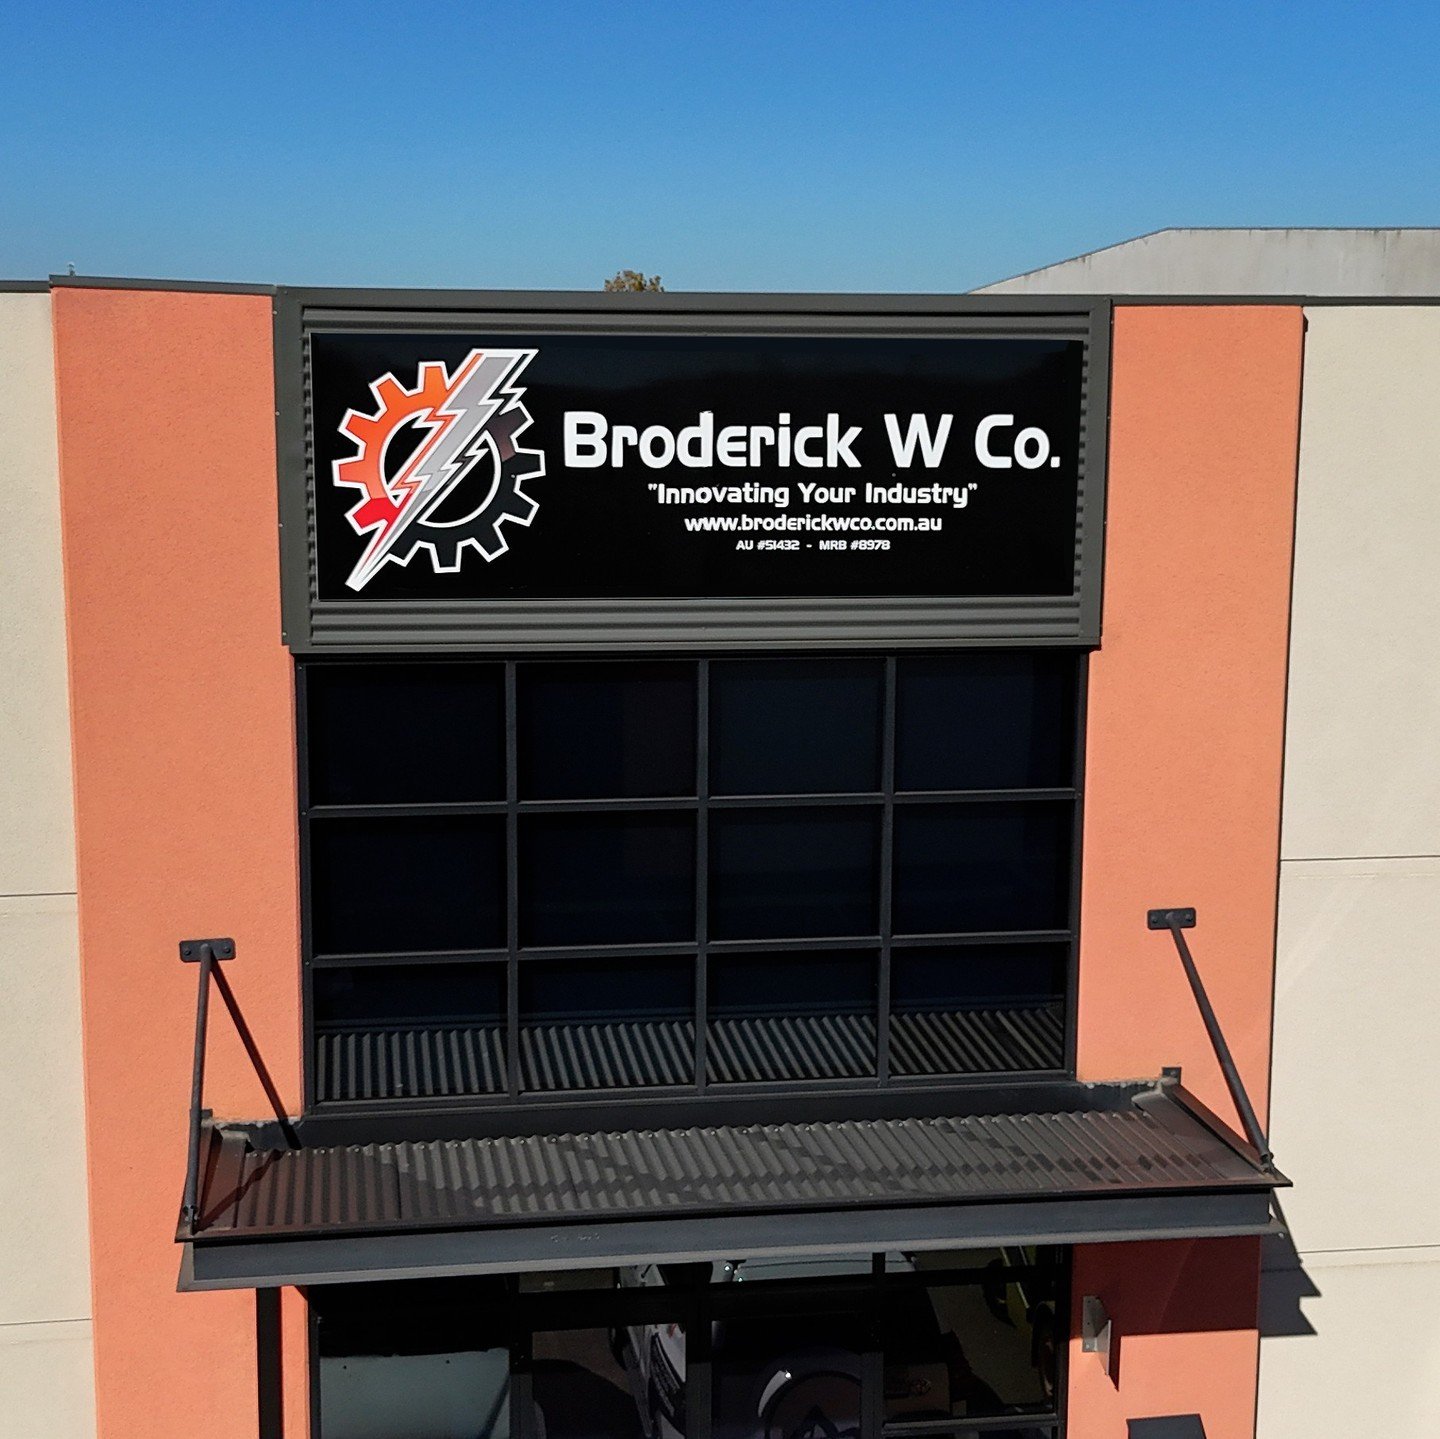 Discover Precision Auto Electrical Solutions at Broderick W Co.! ⚡️

Struggling with electrical issues in your vehicle or equipment?

From diagnostics to installations, our skilled technicians specialise in the intricate world of auto electrics, ensu